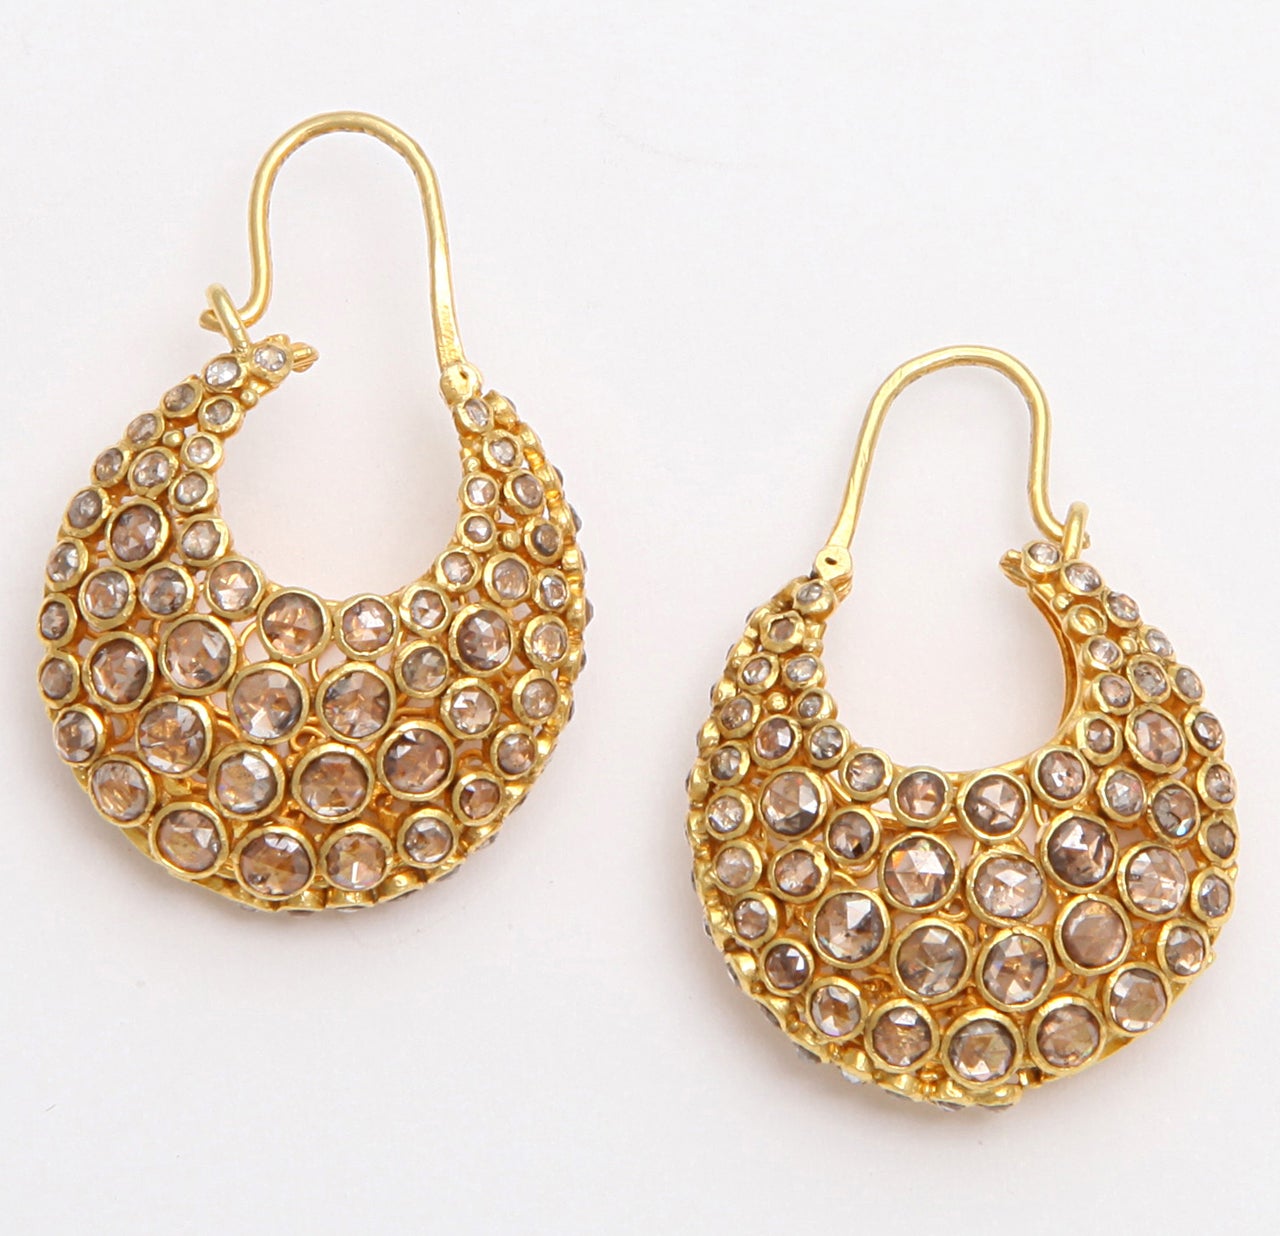 A pair of 18kt yellow gold and diamond earrings. There are approximately 3.21cts of bezel set diamonds